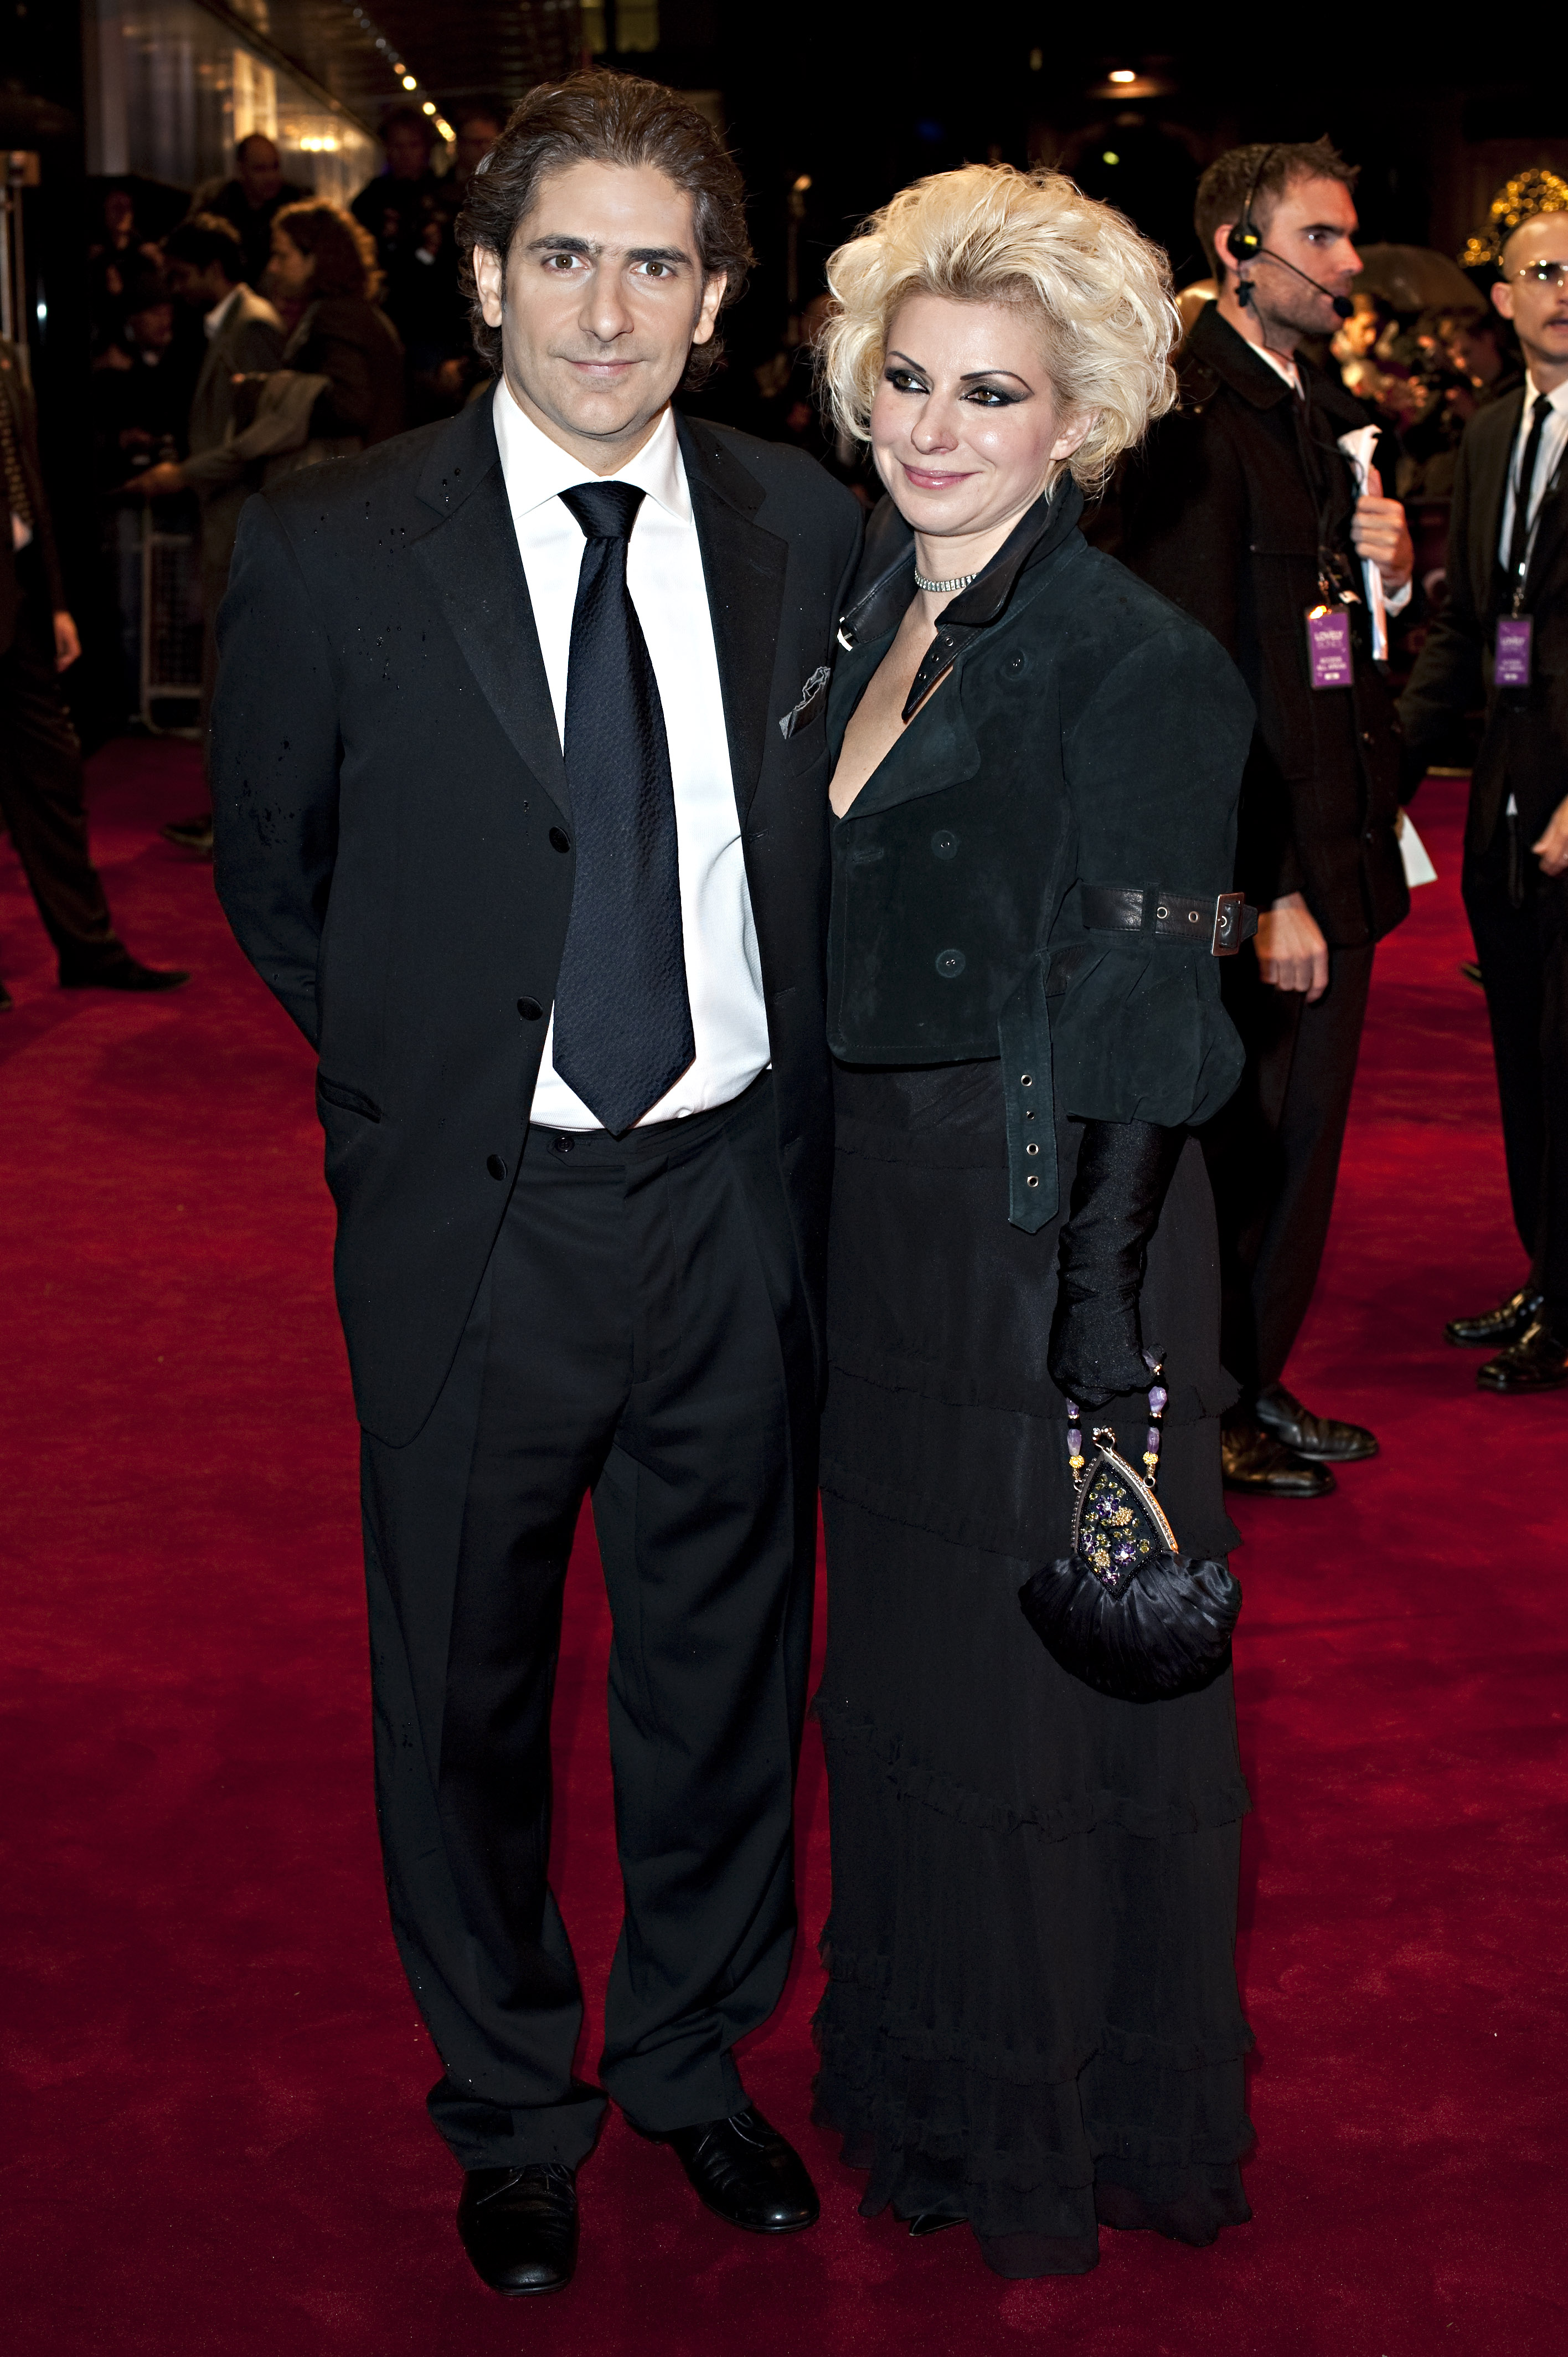 Michael Imperioli and his wife Victoria Imperioli attend the Charity Royal Film Performance 2009 of "The Lovely Bones" at The Odeon Leicester Square on November 24, 2009, in London. | Source: Getty Images